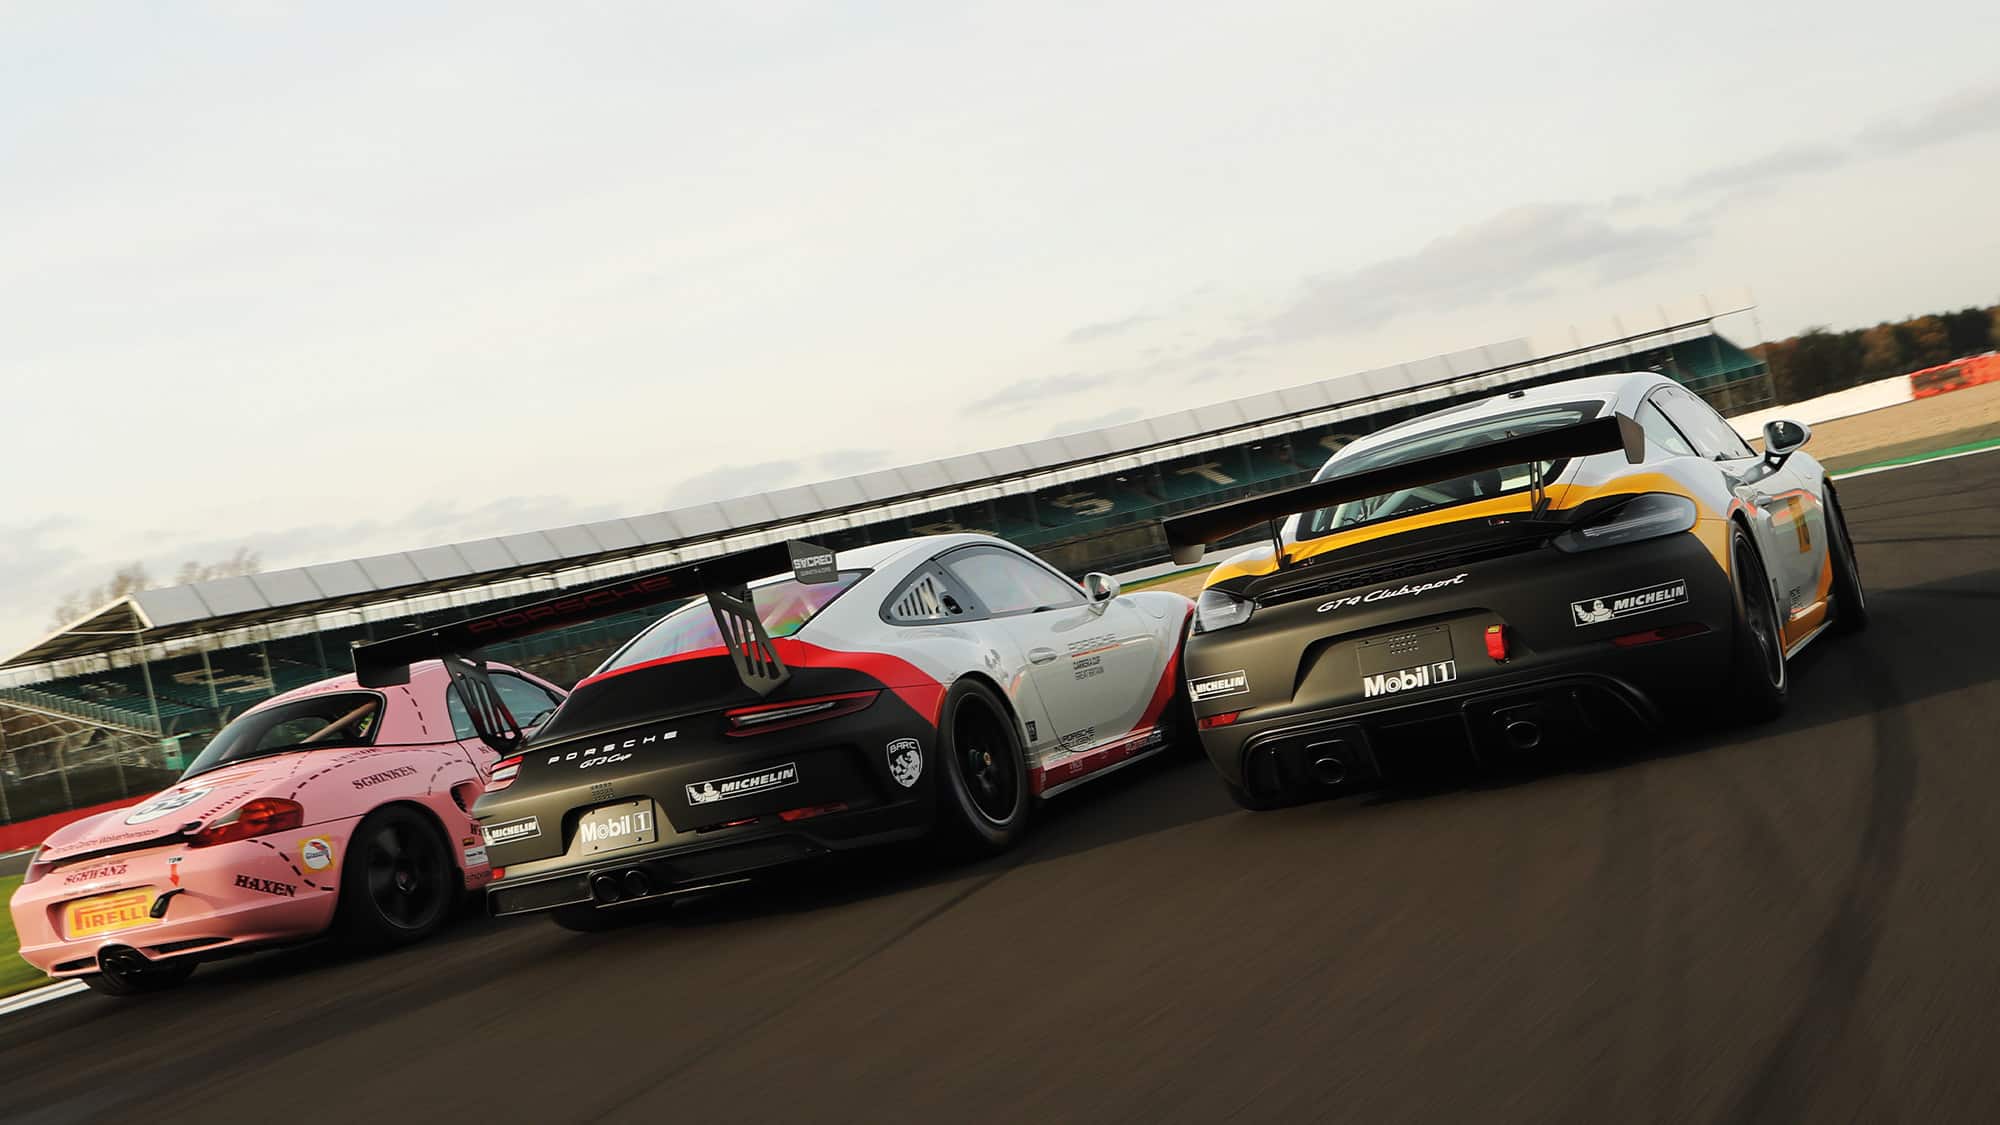 Porsche 986 Boxster S, Cayman GT4 and 911 Gt3 Cup on track at SIlverstone - rear